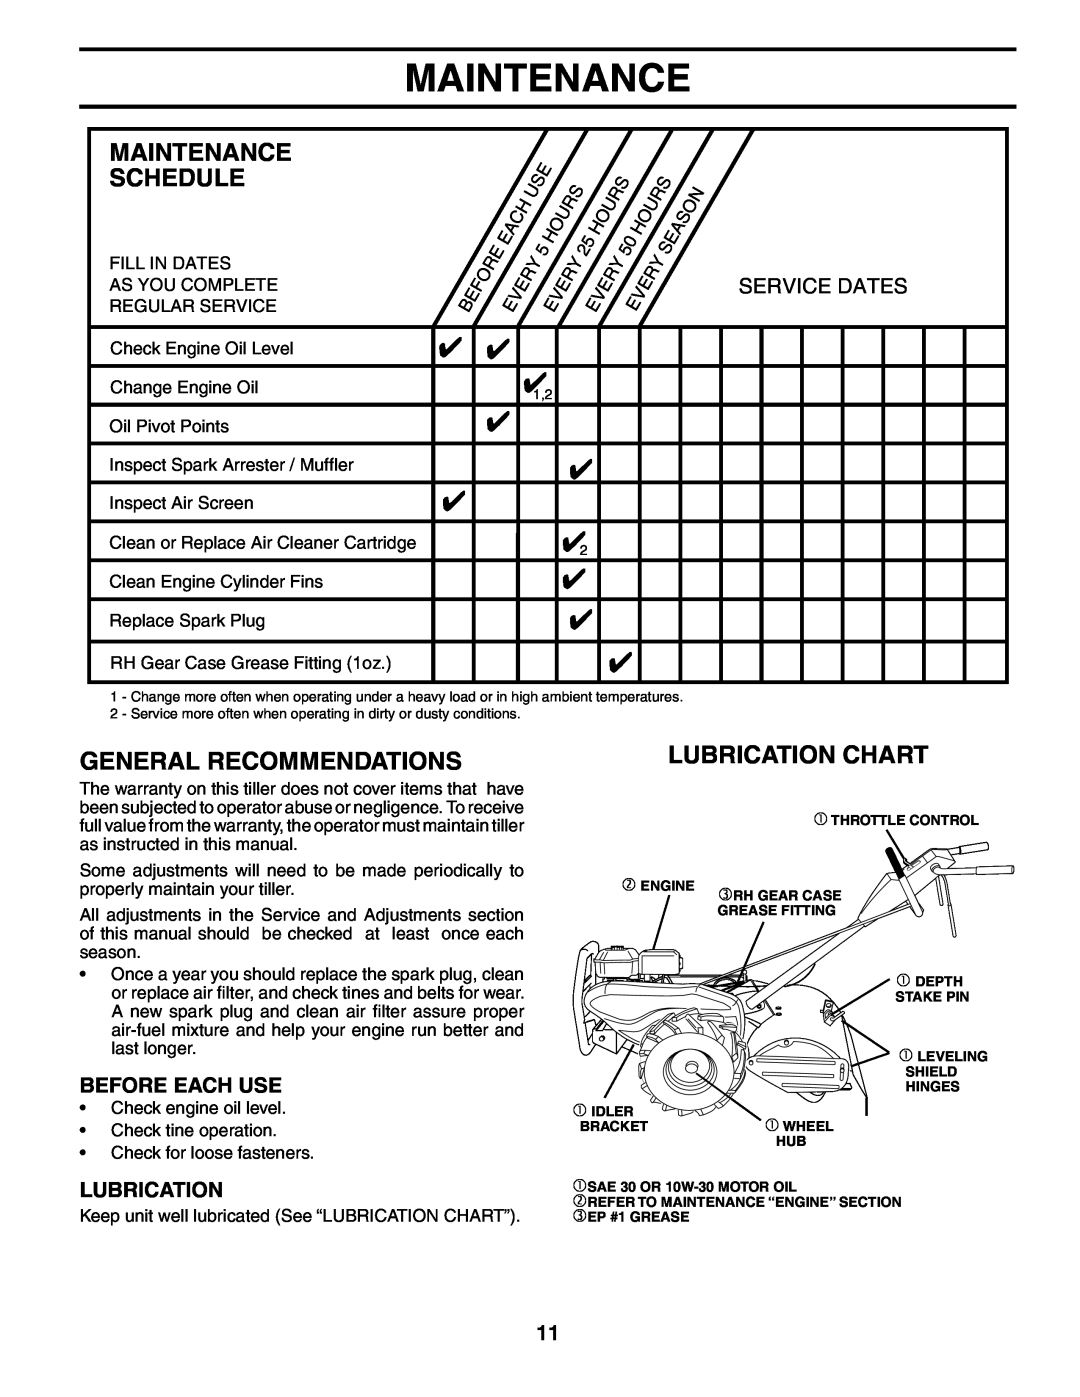 Poulan 188904 Maintenance Schedule, General Recommendations, Lubrication Chart, Before Each Use, Service Dates 